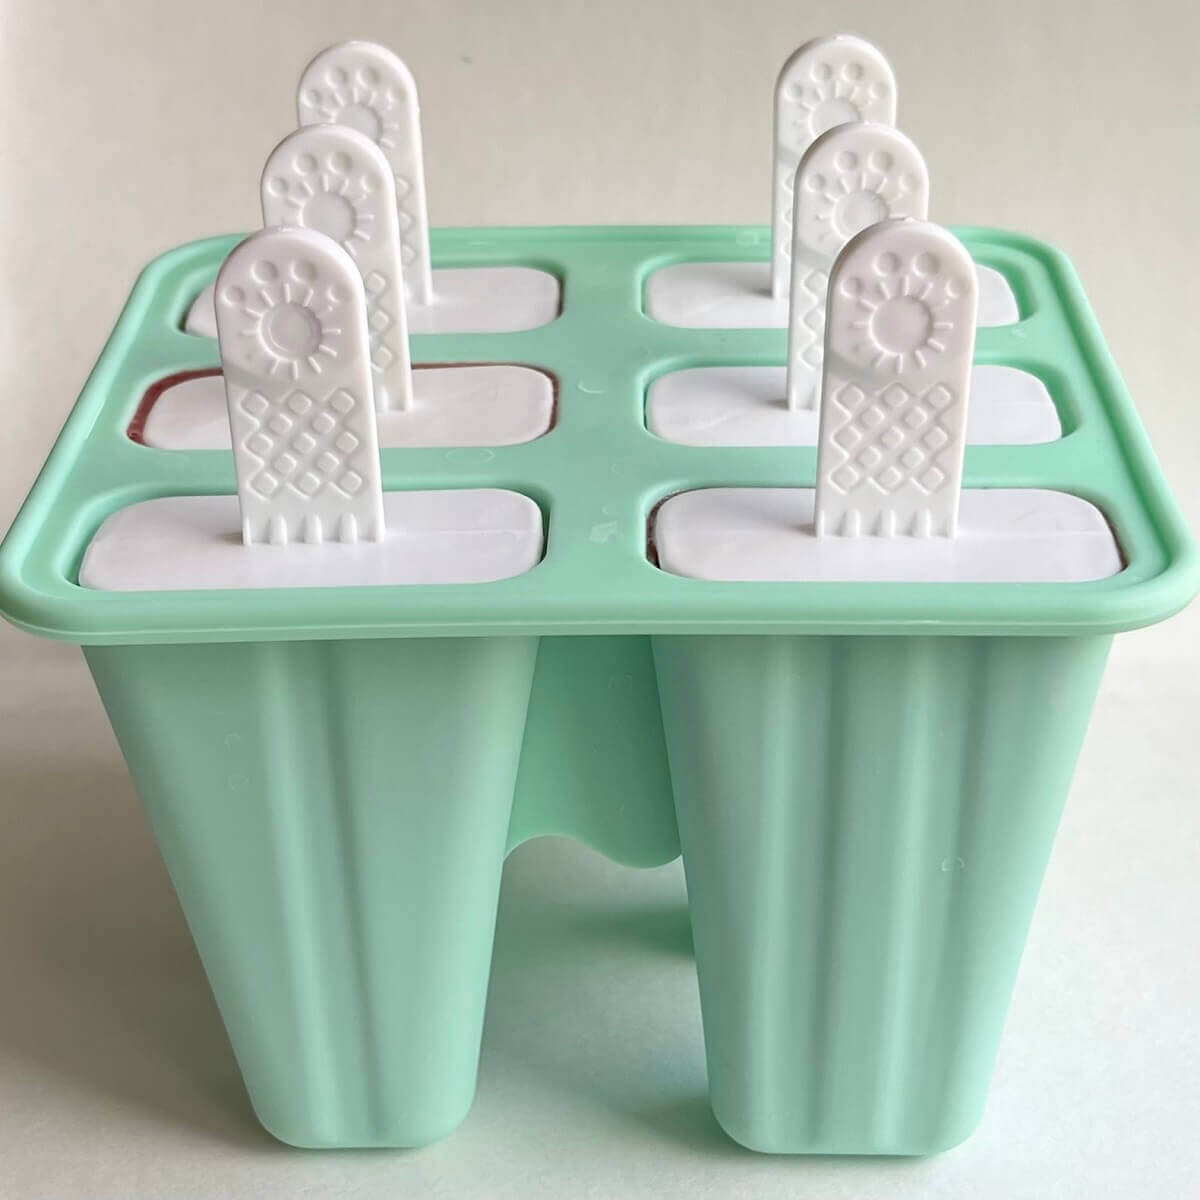 A turquoise popsicle mold with white popsicle sticks.